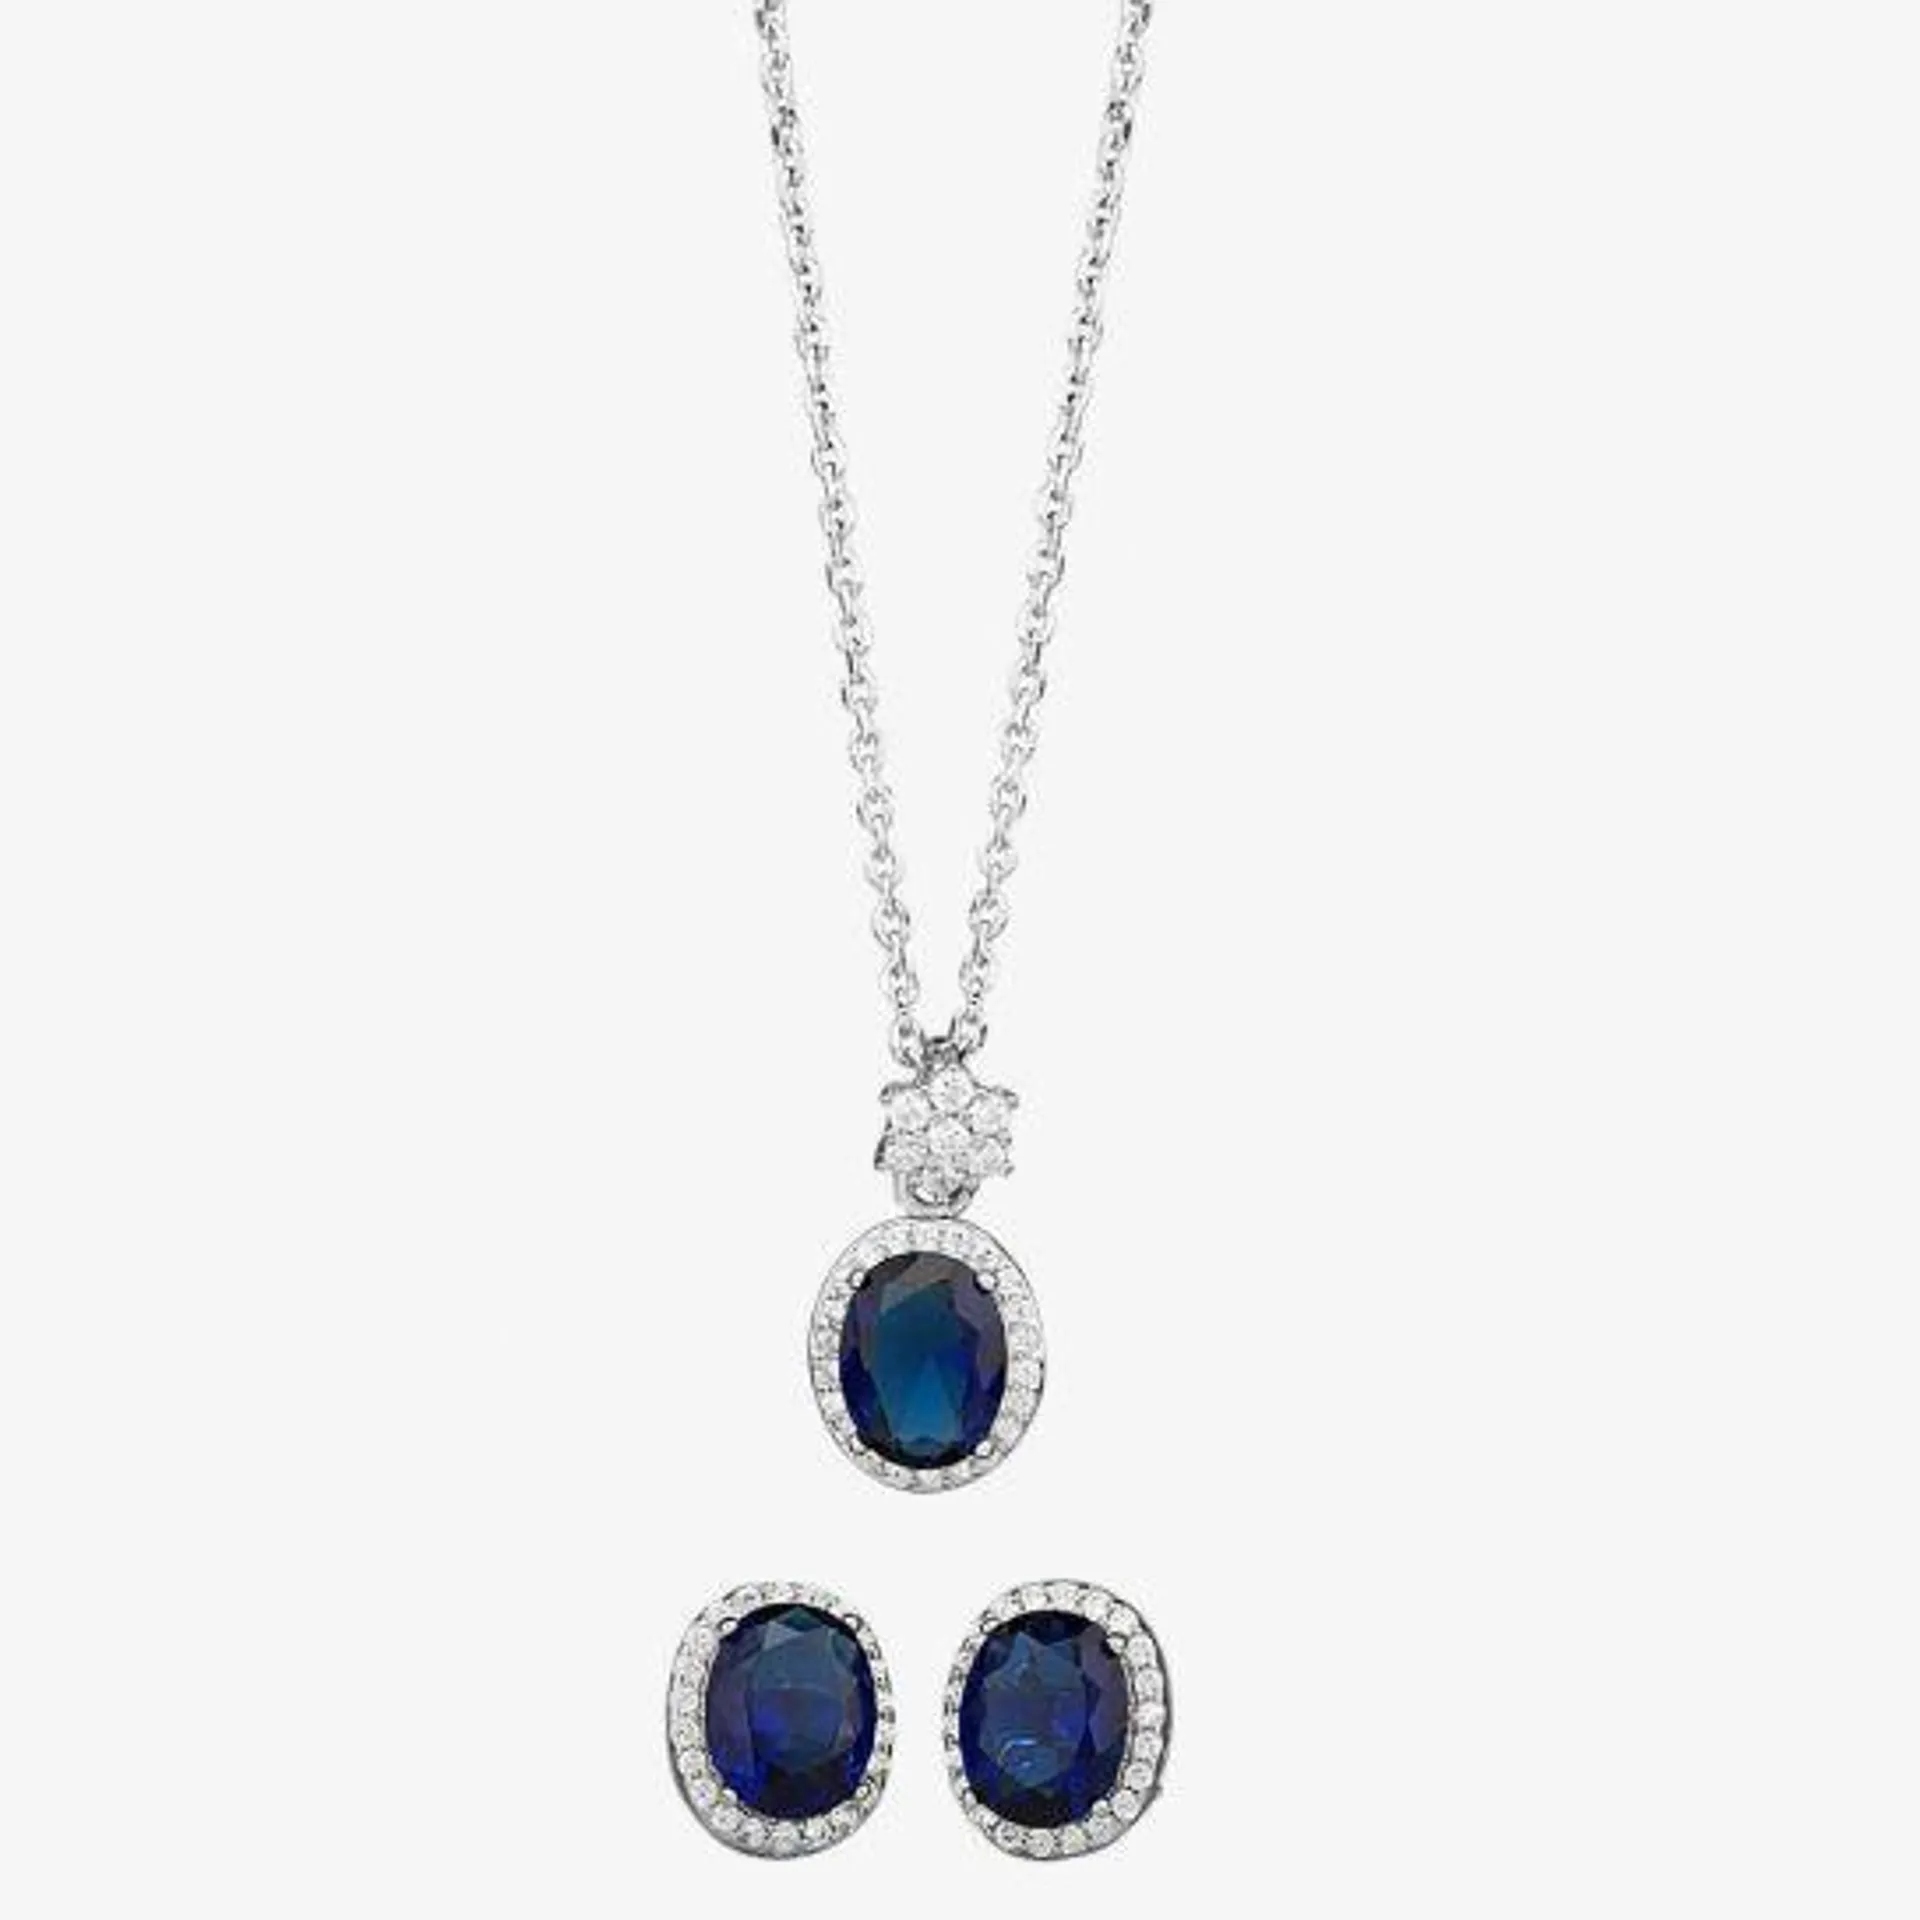 Silver Blue Cubic Zirconia Oval Pendant and Earrings